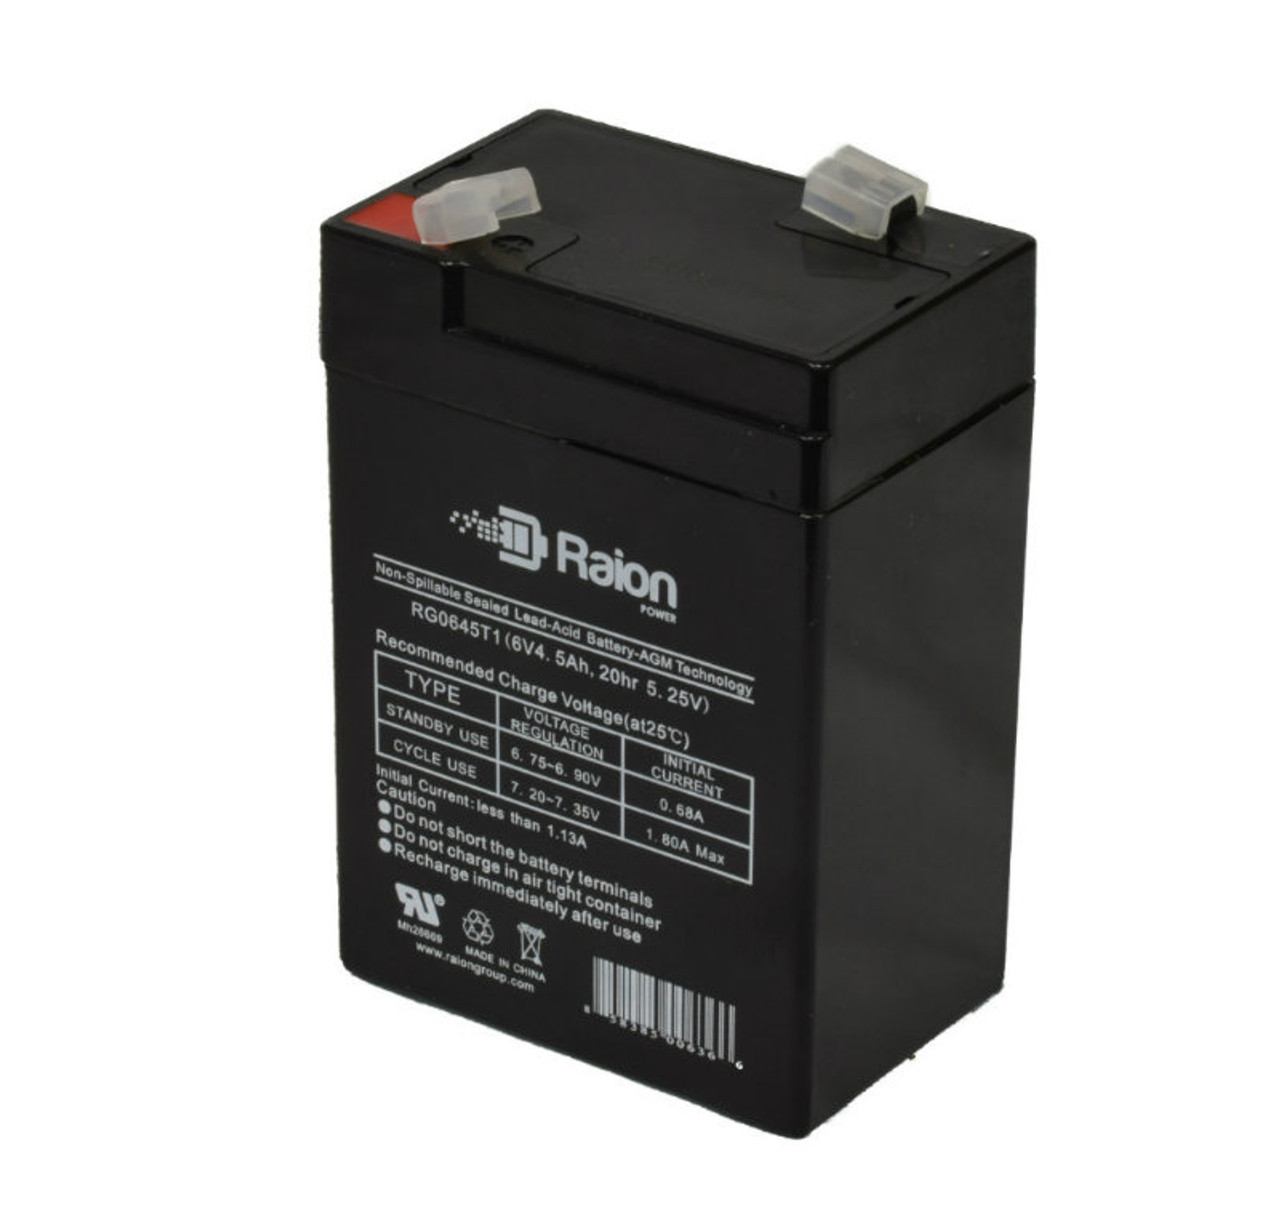 Raion Power RG0645T1 6V 4.5Ah Replacement Battery Cartridge for Carpenter Watchman 713520